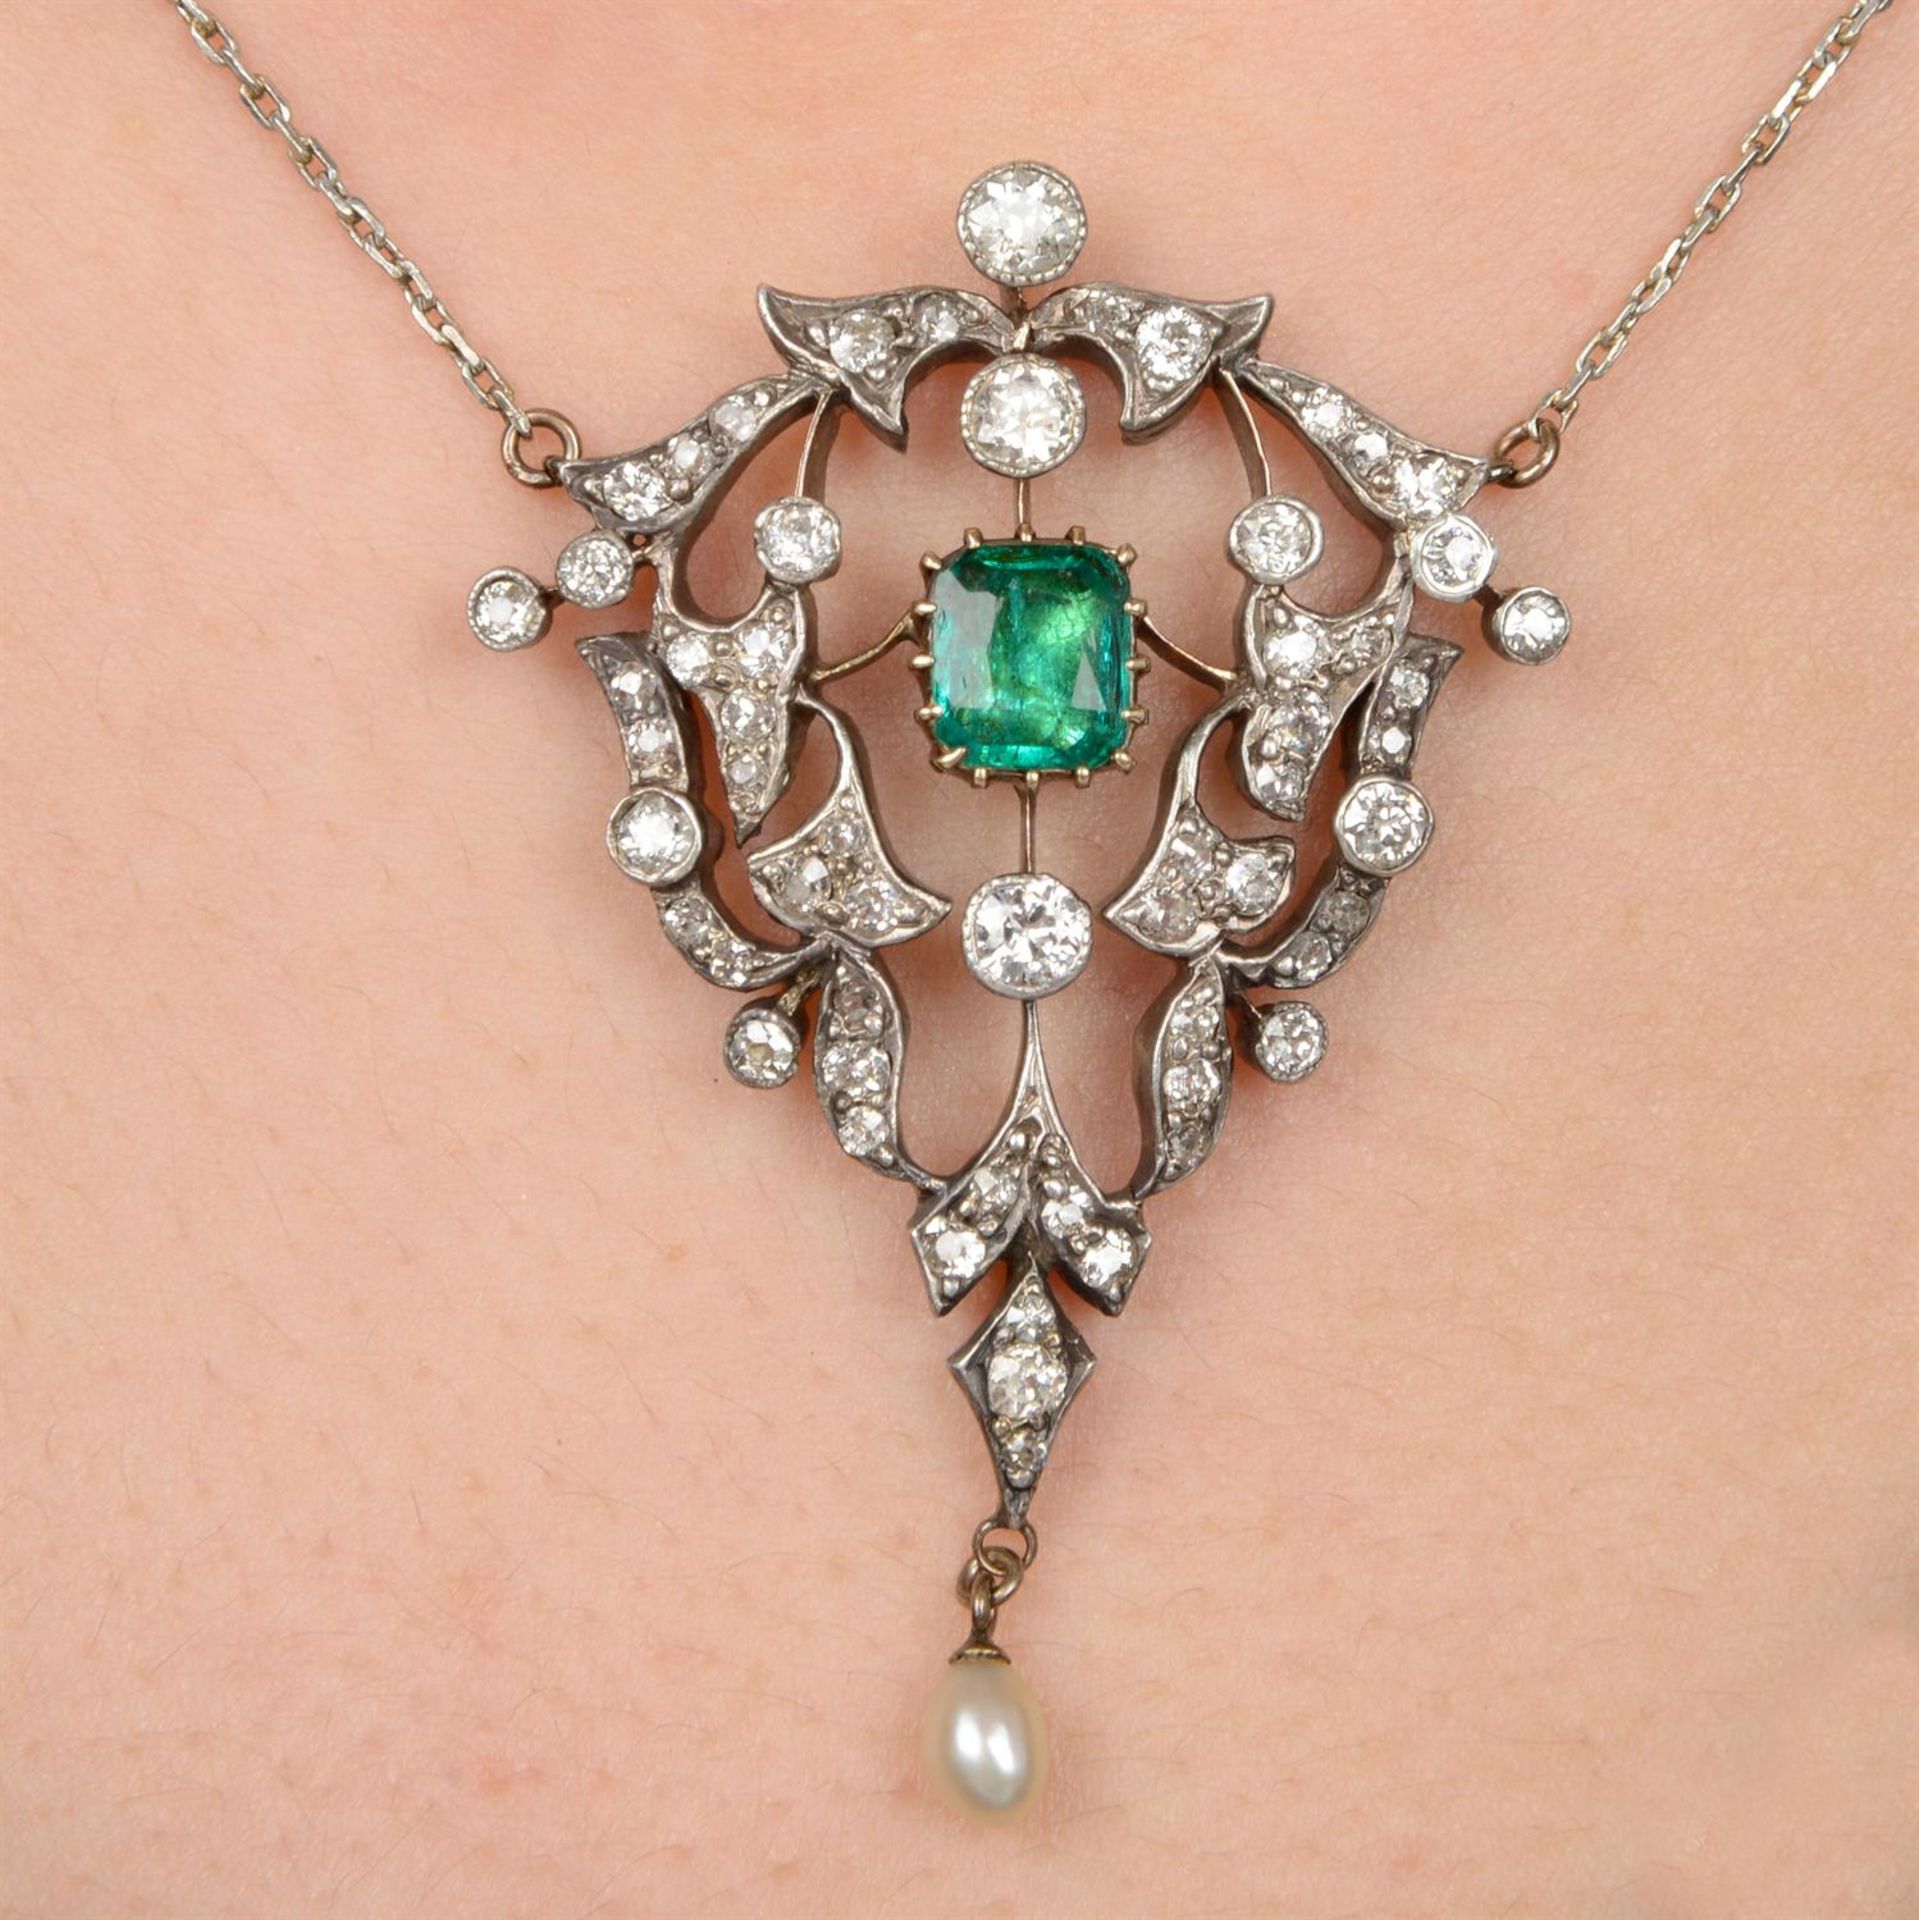 19th century emerald, diamond and pearl necklace - Image 7 of 7